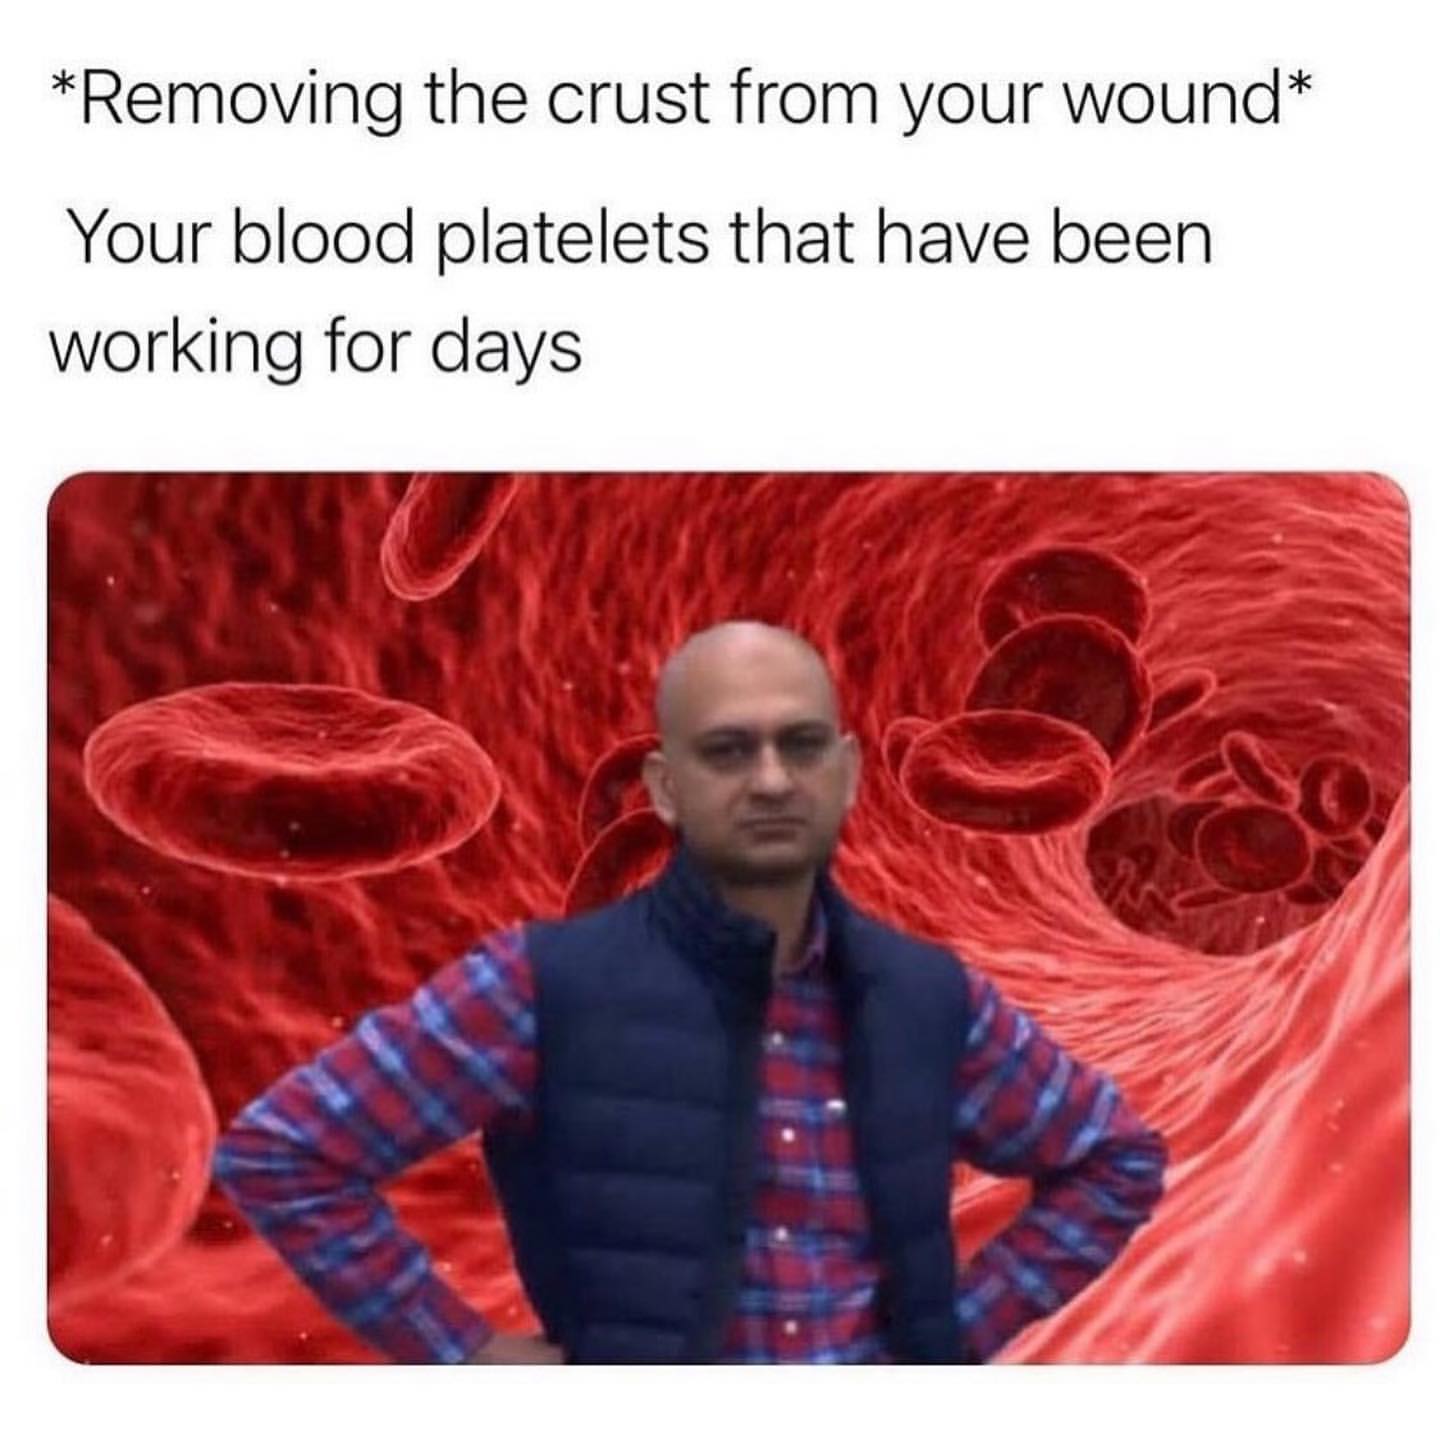 *Removing the crust from your wound* Your blood platelets that have been working for days.